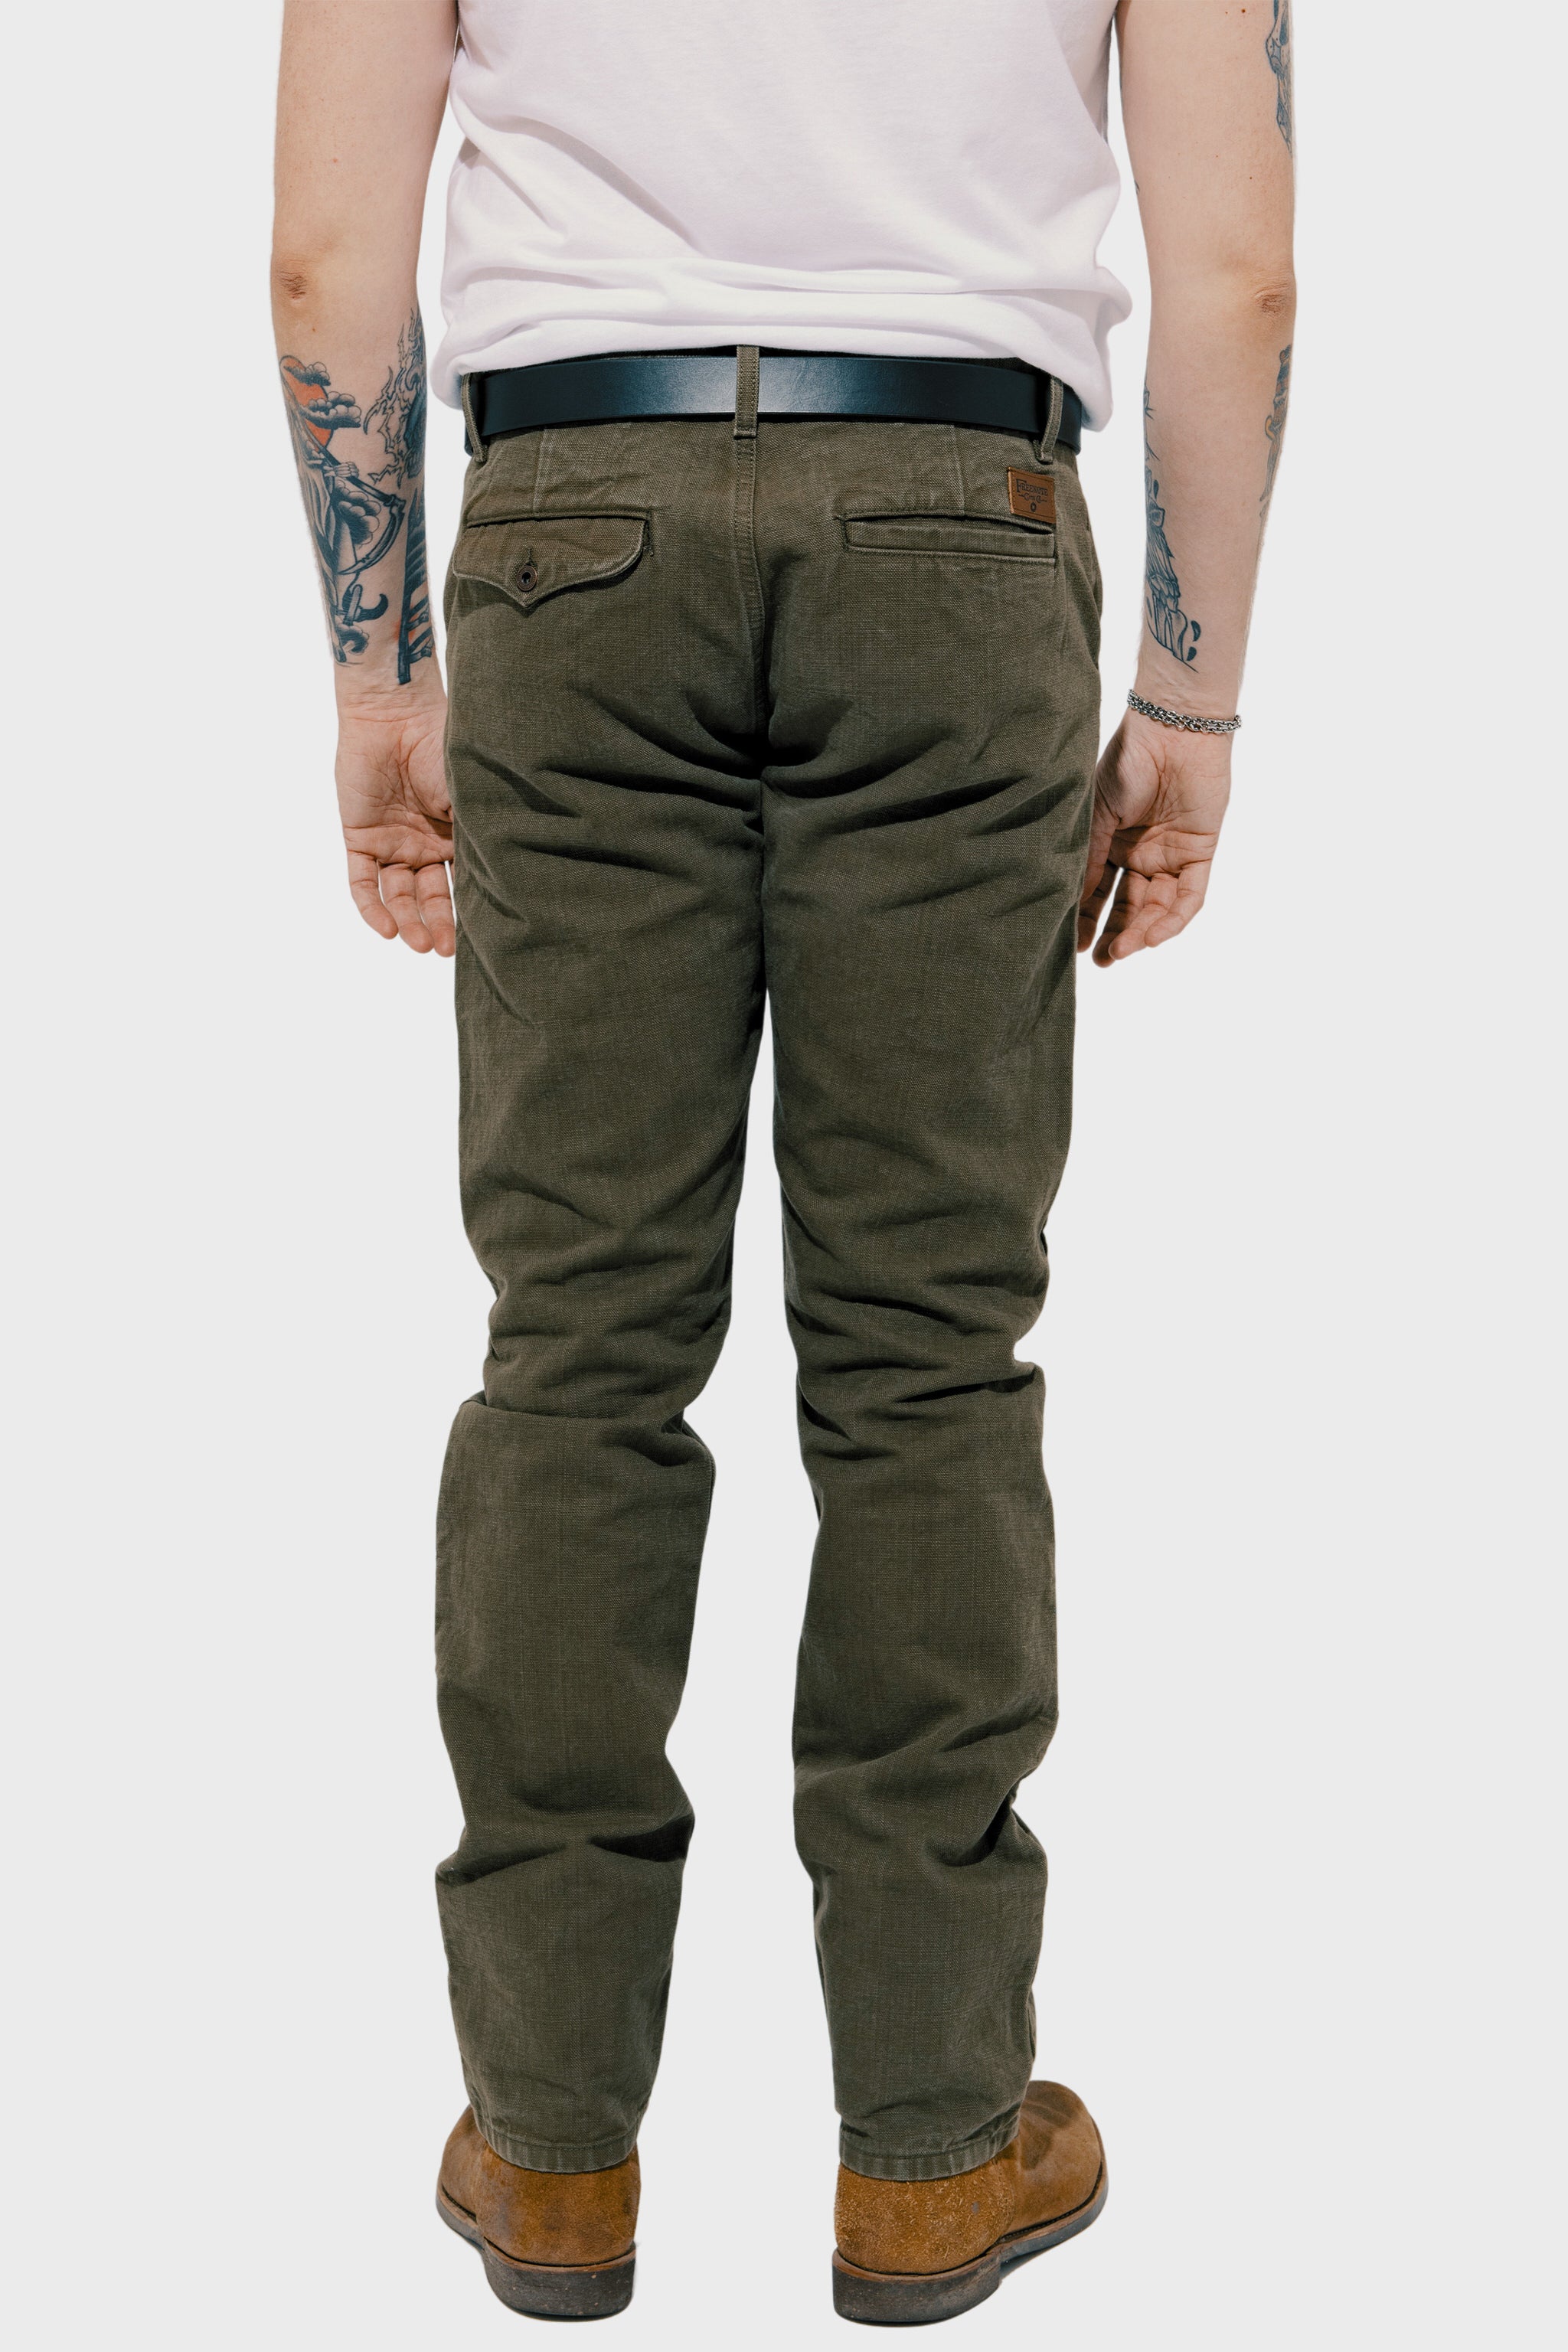 Men's Freenote Cloth Workers Chino in Army Green